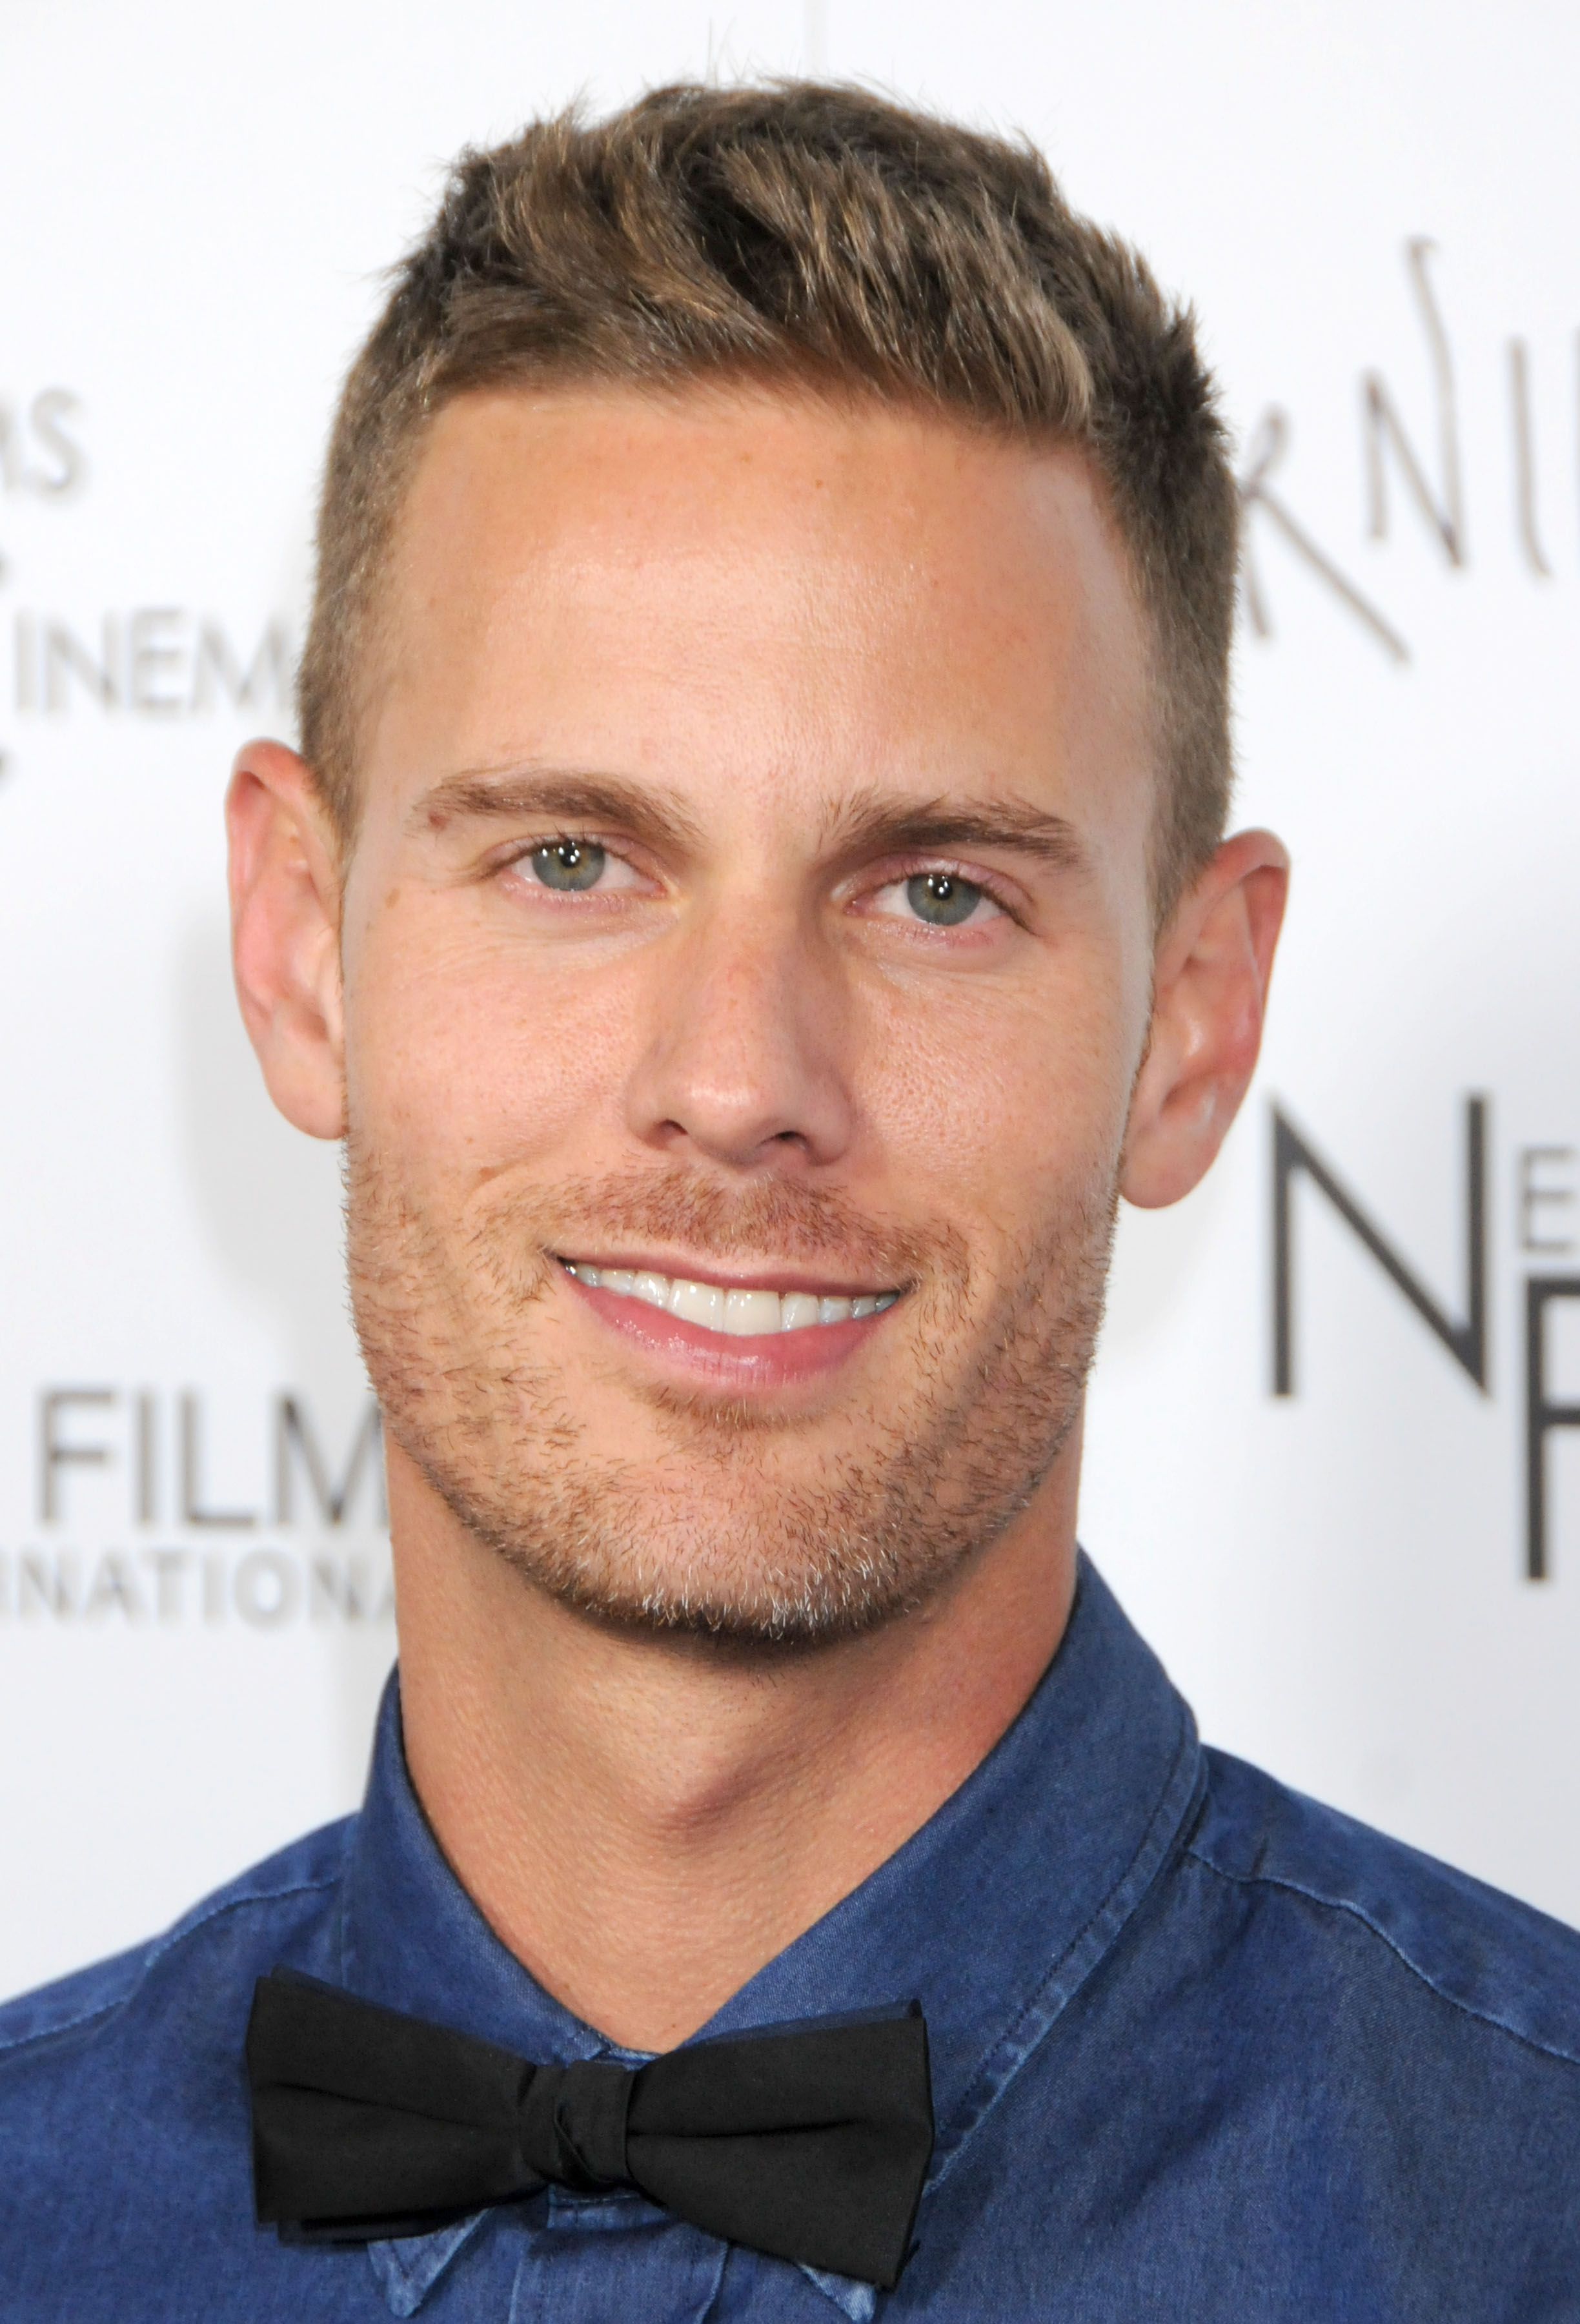 Christopher Landon at the Los Angeles premiere of "Burning Palms," 2011 | Source: Getty Images